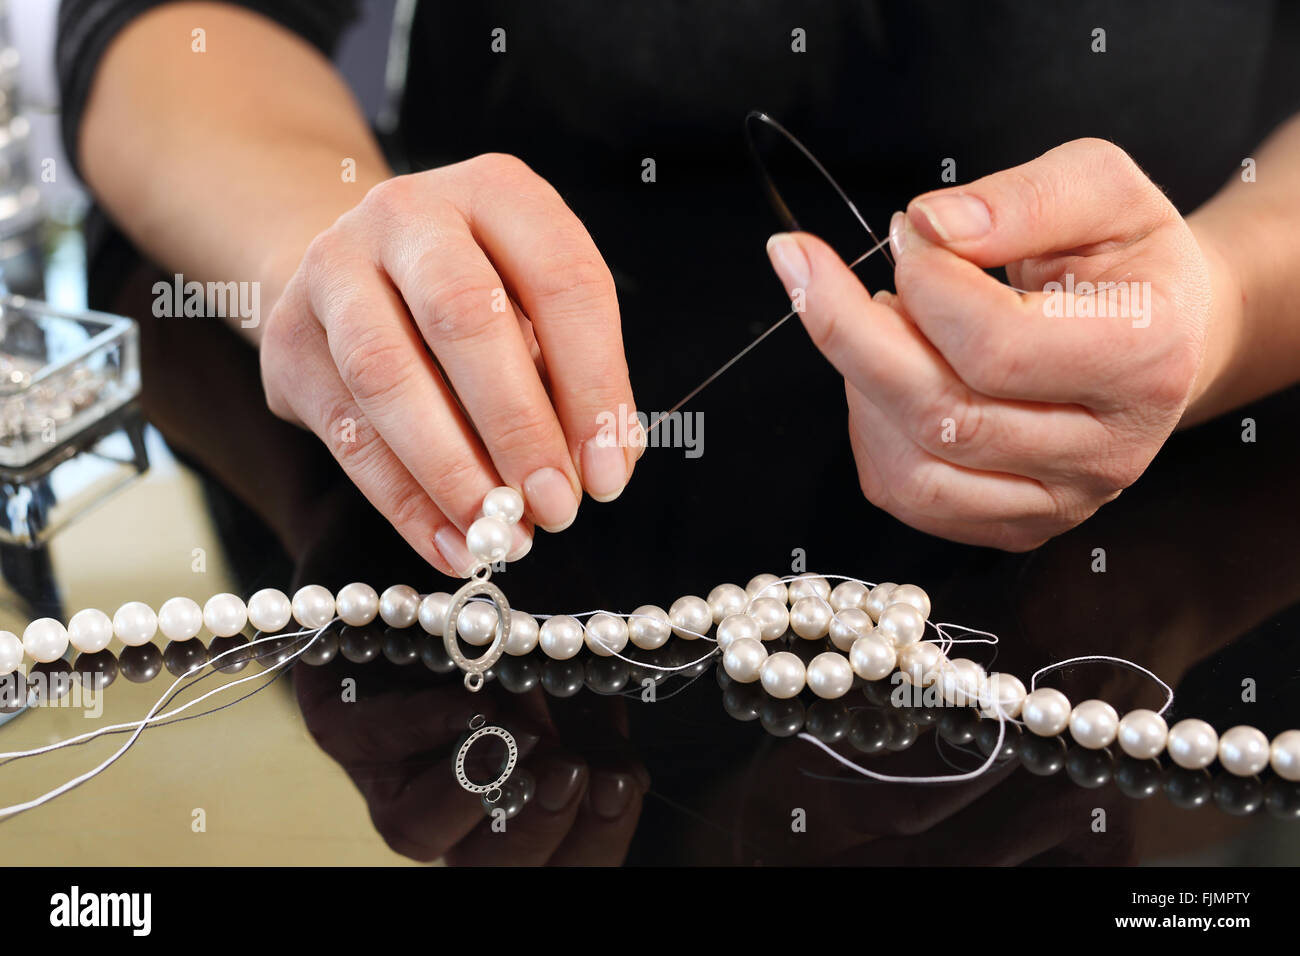 Workshop jewelery, creating jewelry with pearls. Pearls, beads. Threading beads Pearl necklace Stock Photo